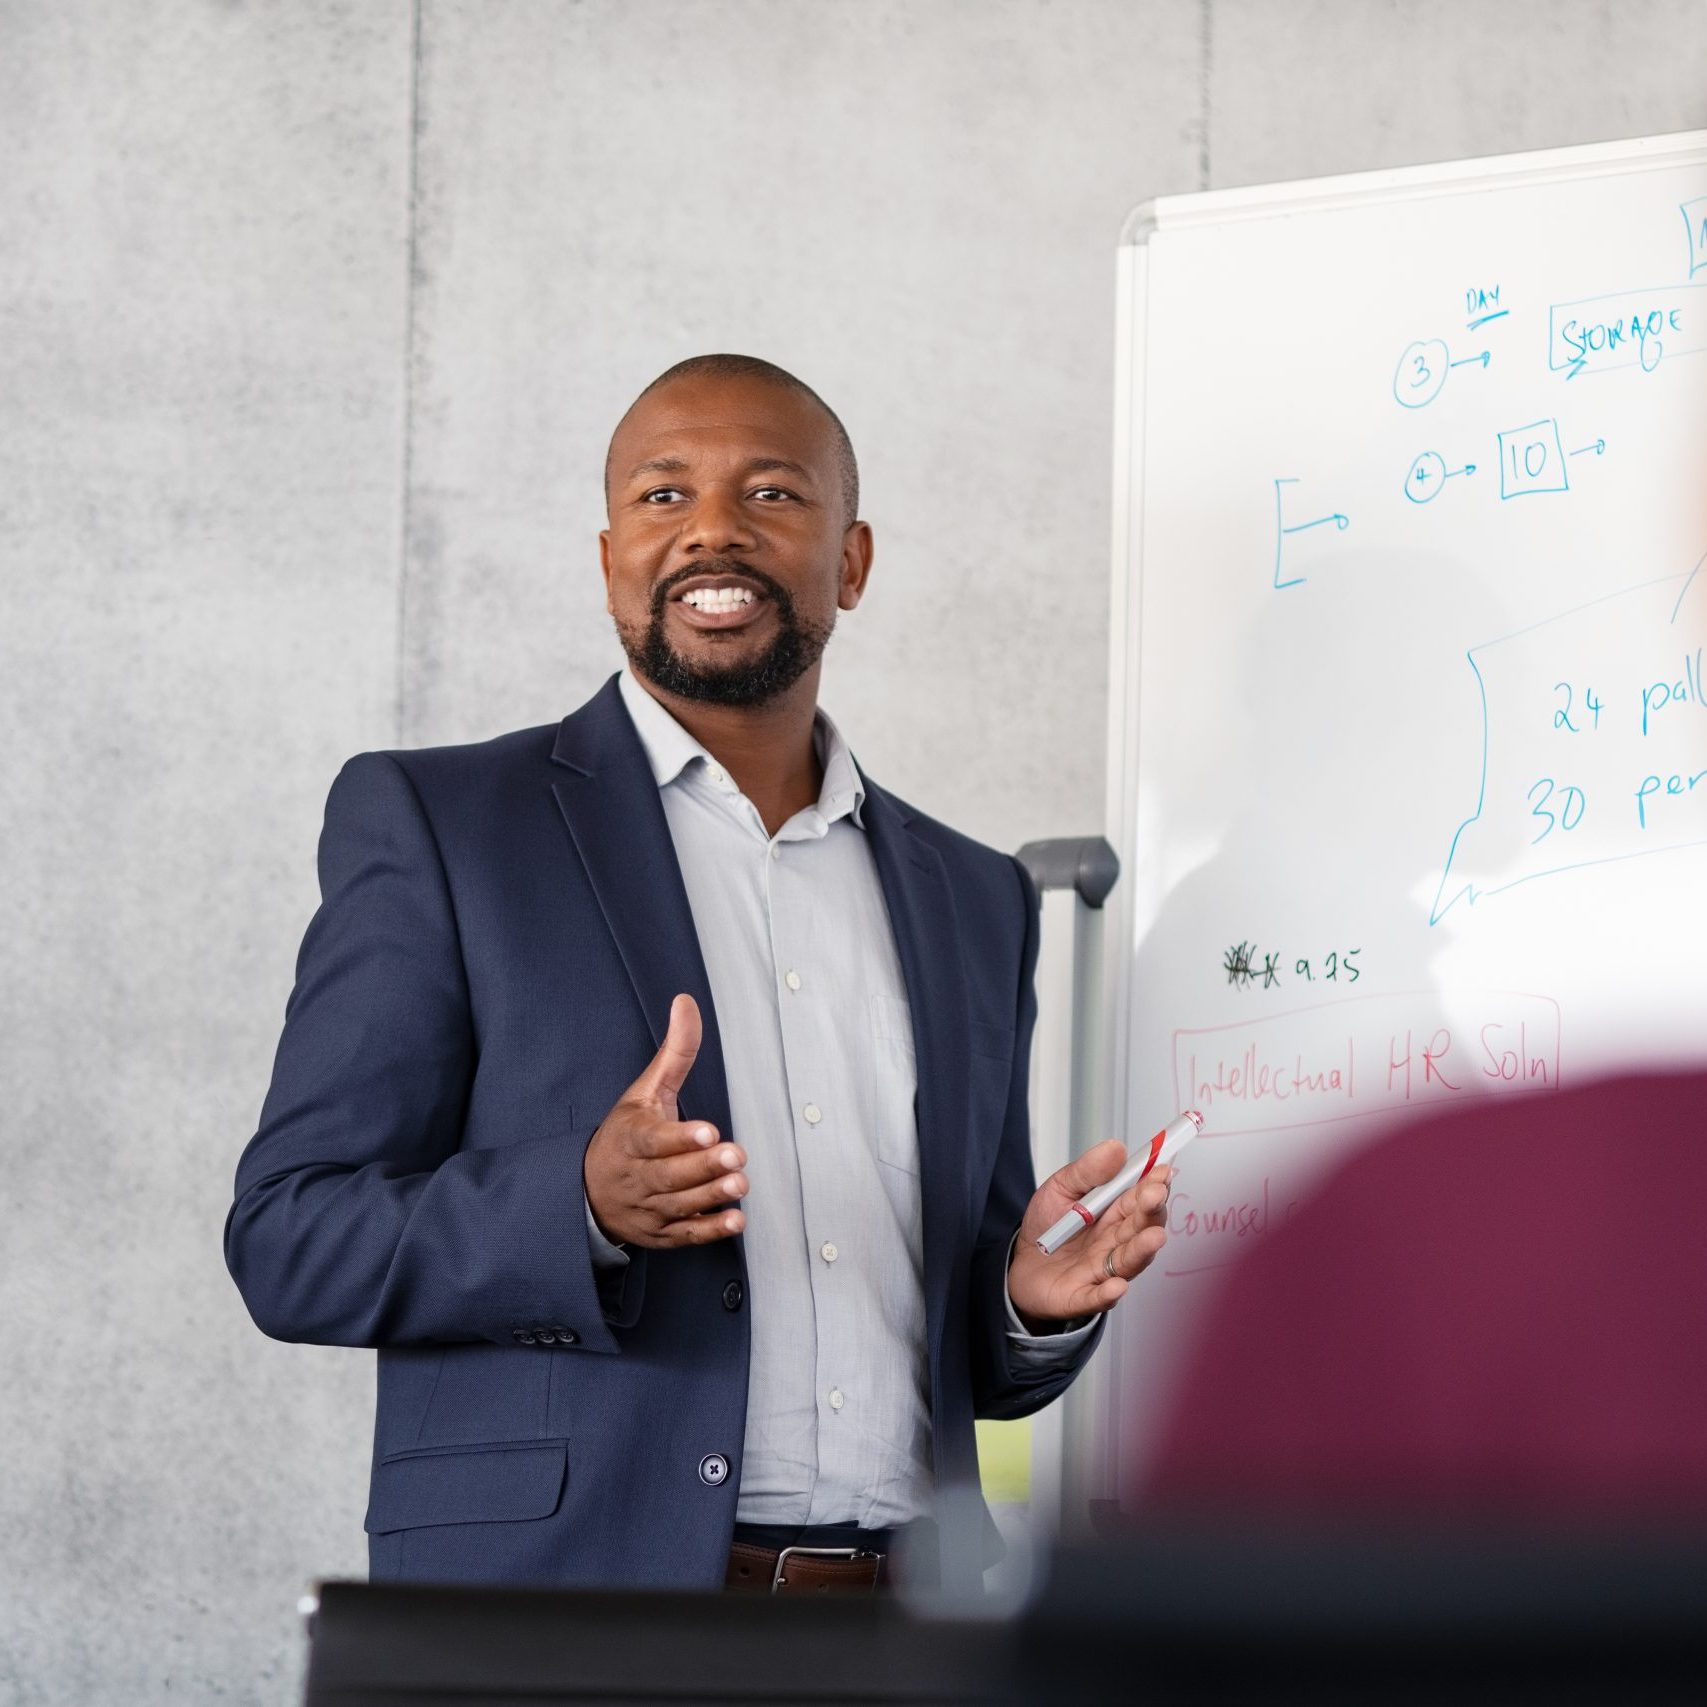 Mature african american coach explaining strategy to his team with copy space. Successful businessman presenting new project to employees during meeting room. Conference speaker talk to audience while giving presentation on whiteboard to business group of people.